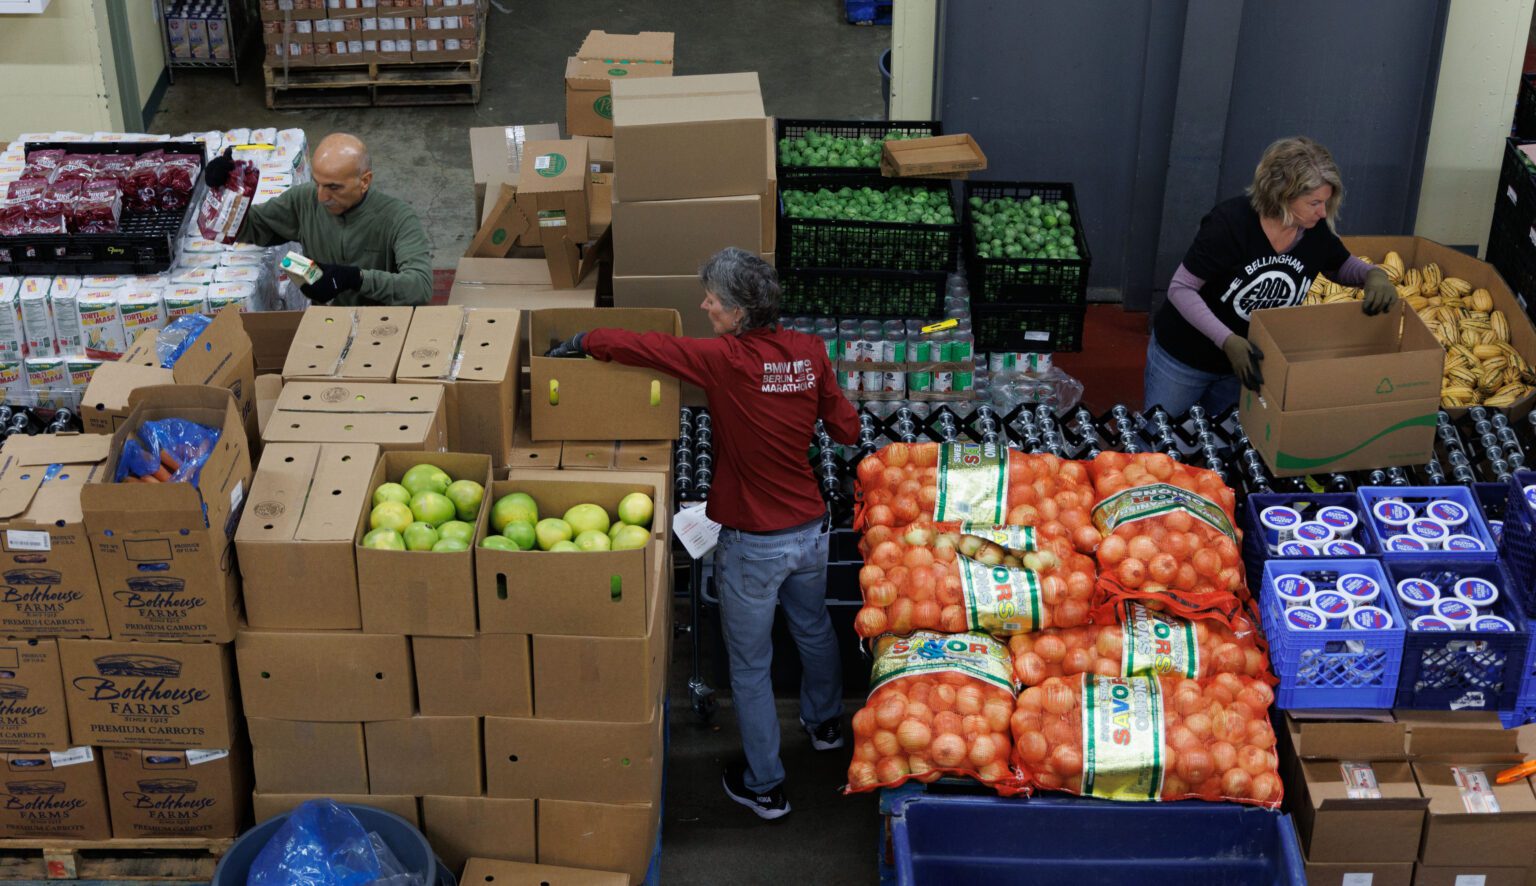 Volunteers Buzz Hagshenas, Arlane Olson and Tamara Godbey sort through boxes of fresh produce and canned food.